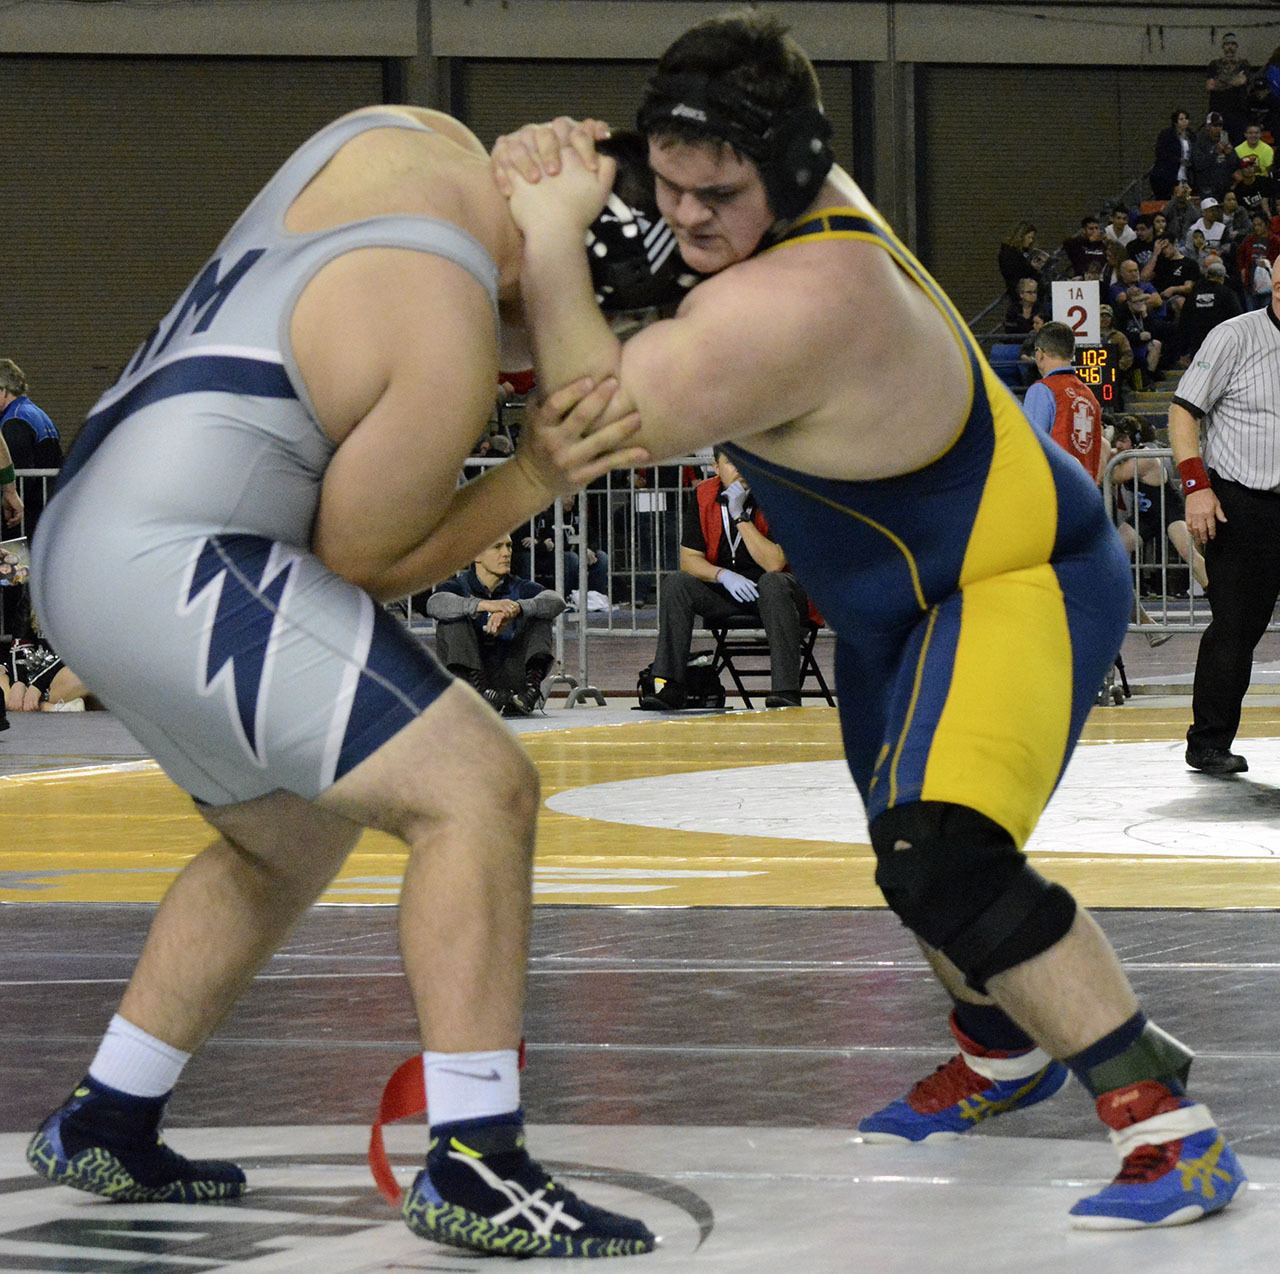 Arlington’s Tristan Emery competes in his first-round match at the 3A state tournament. Brandon Adam/Staff Photo